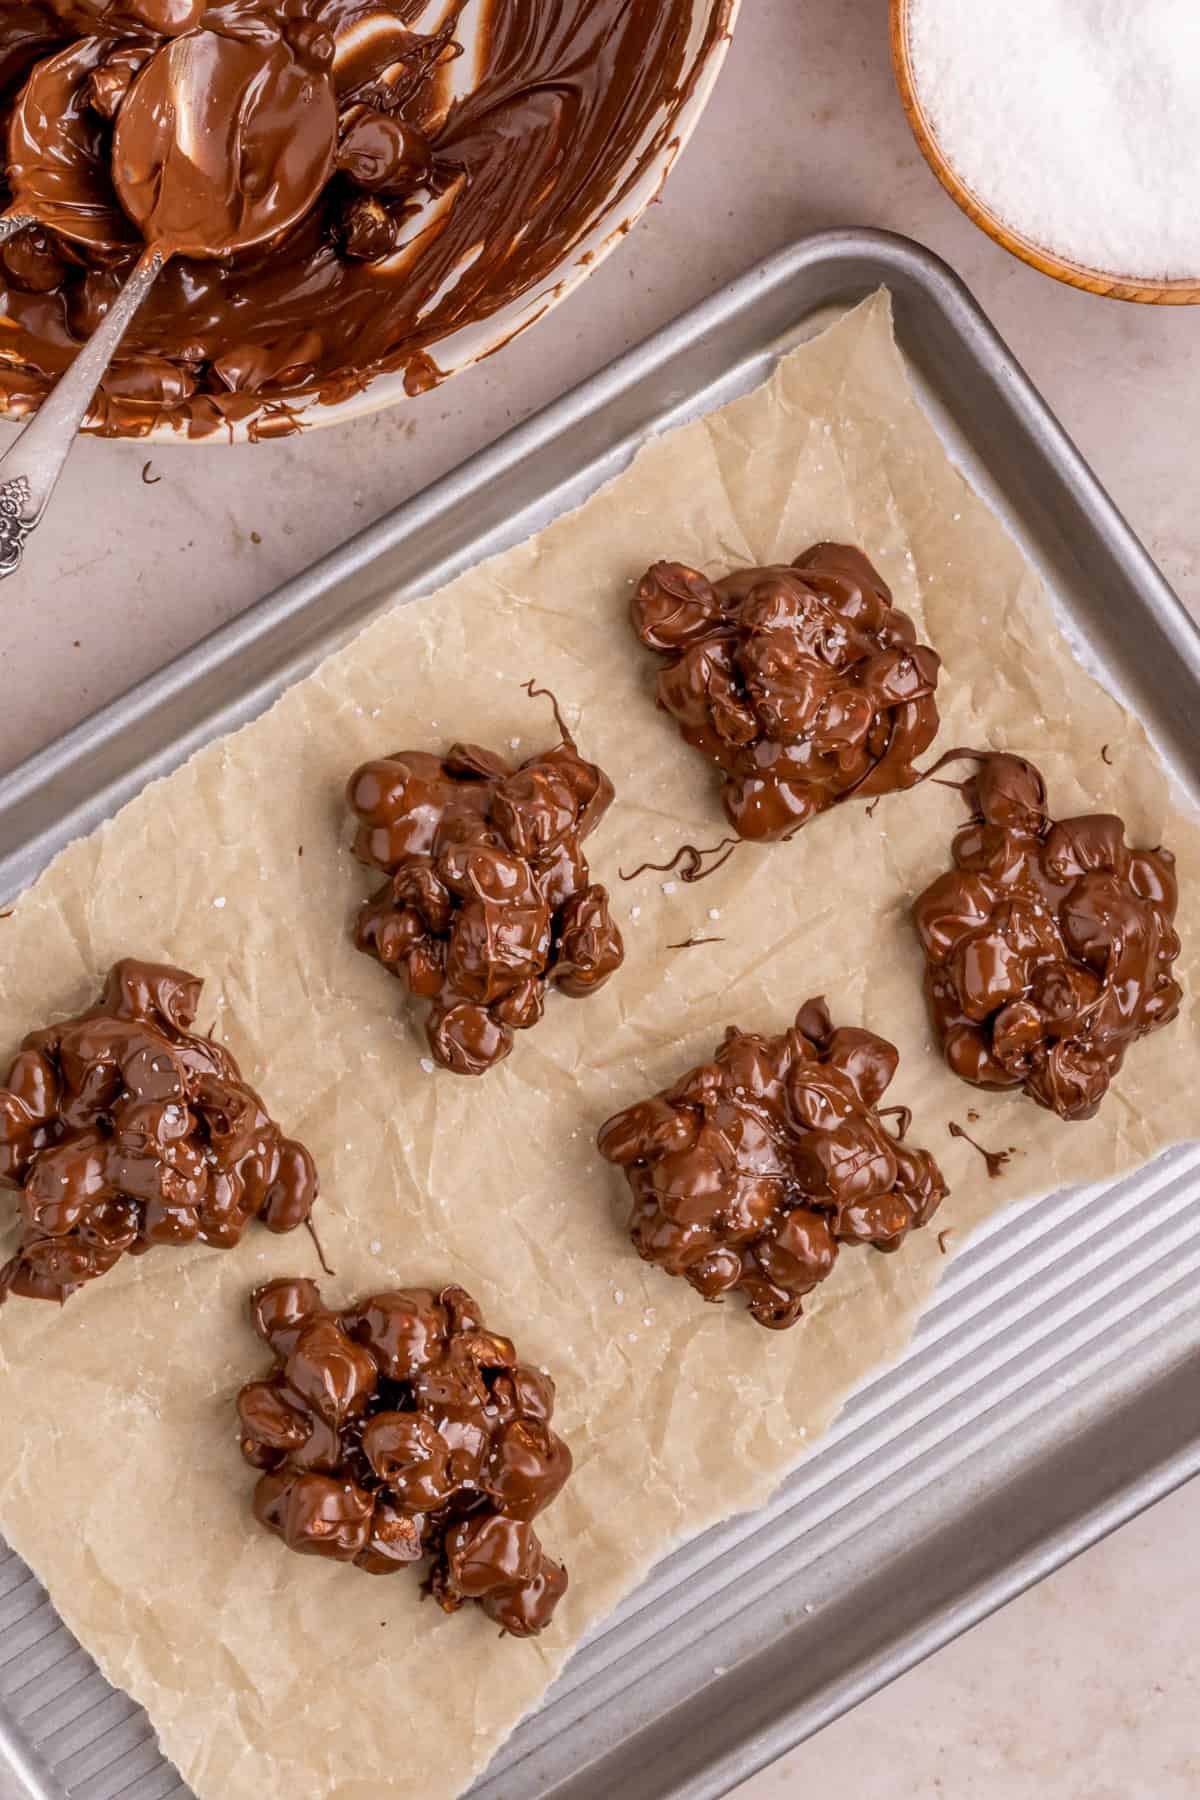 Rocky Road candy topped with salt on lined baking sheet.